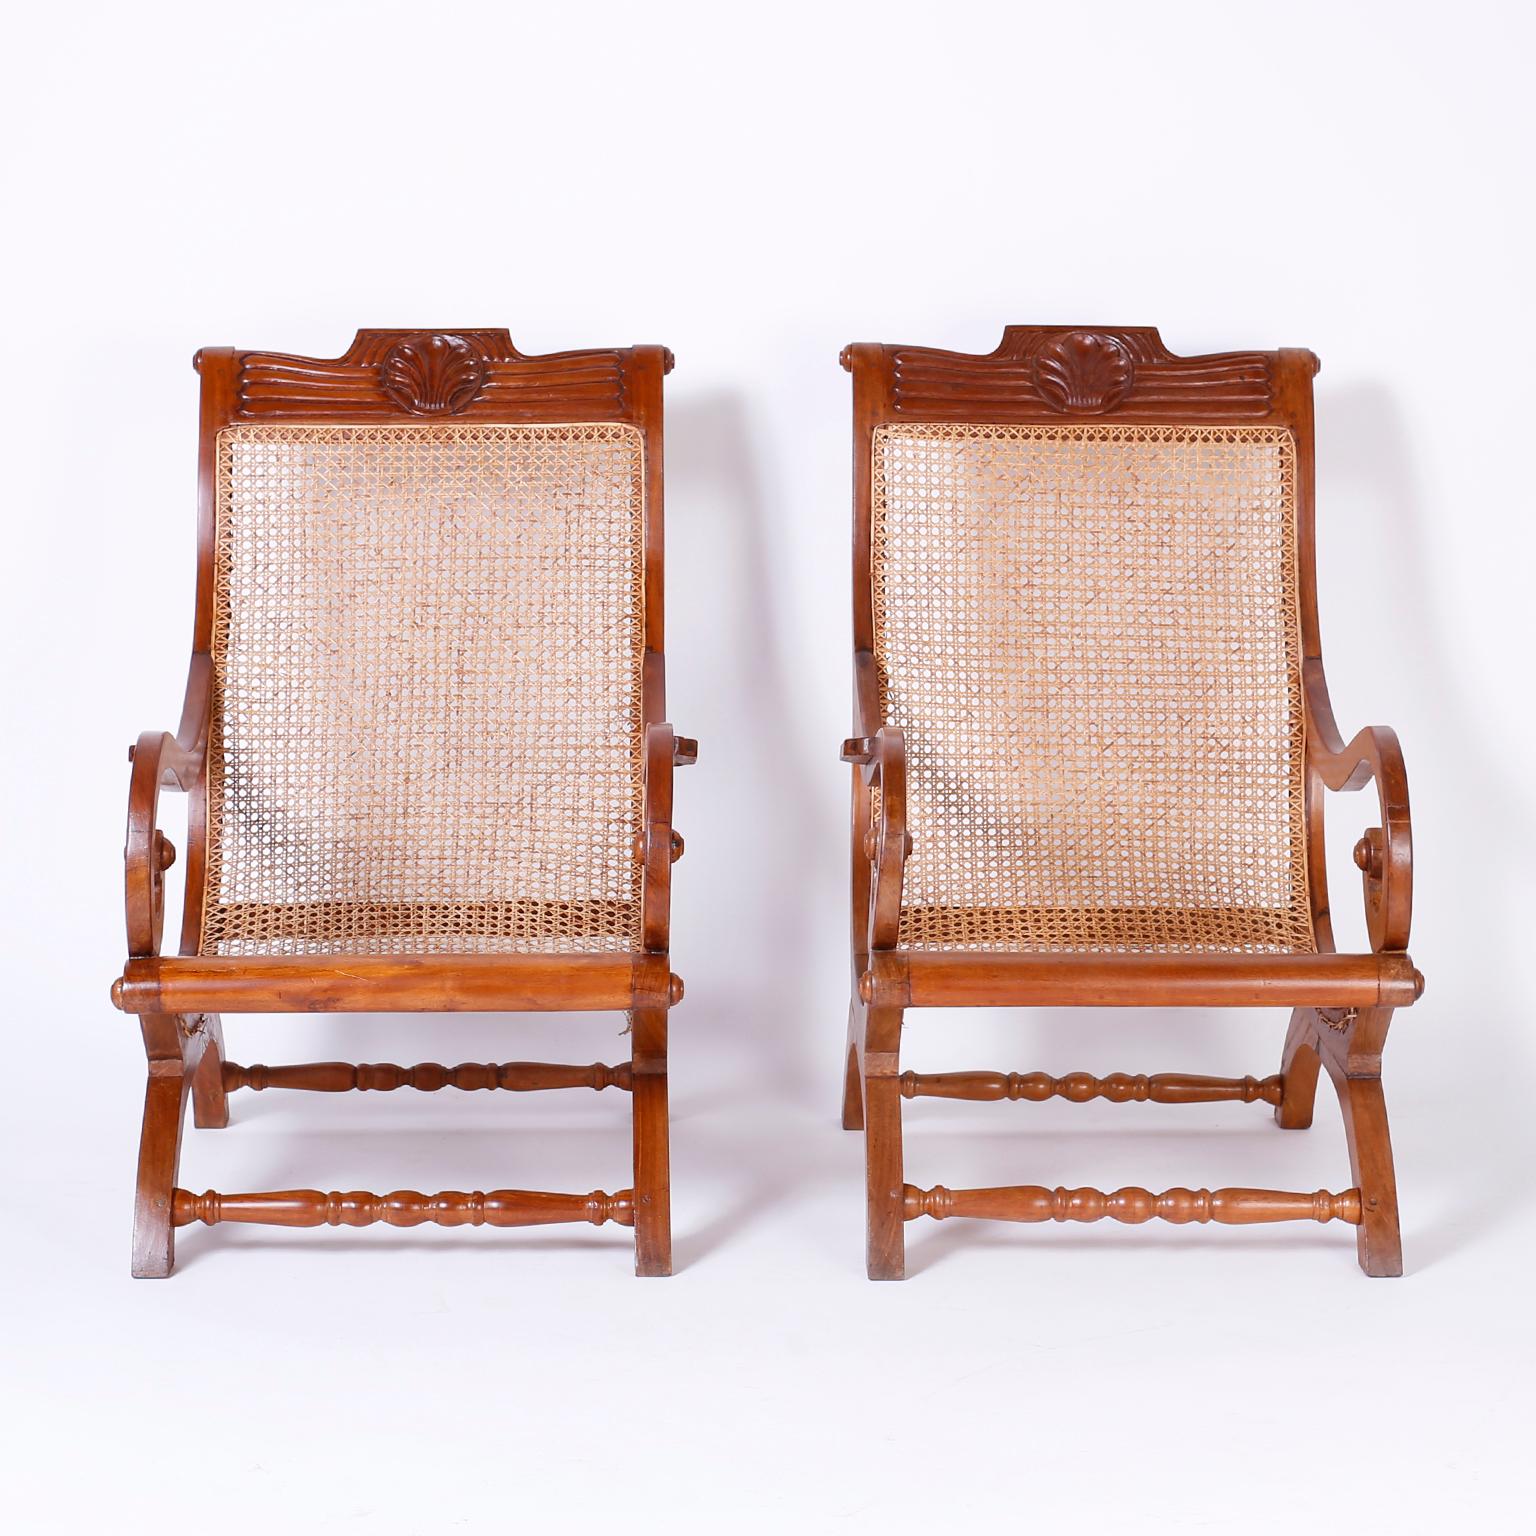 Refined pair of antique Anglo Indian lounge chairs, hand crafted in mahogany. Detailed with a floral carved crest, caned back and seat, turned stretchers and a graceful flowing form.